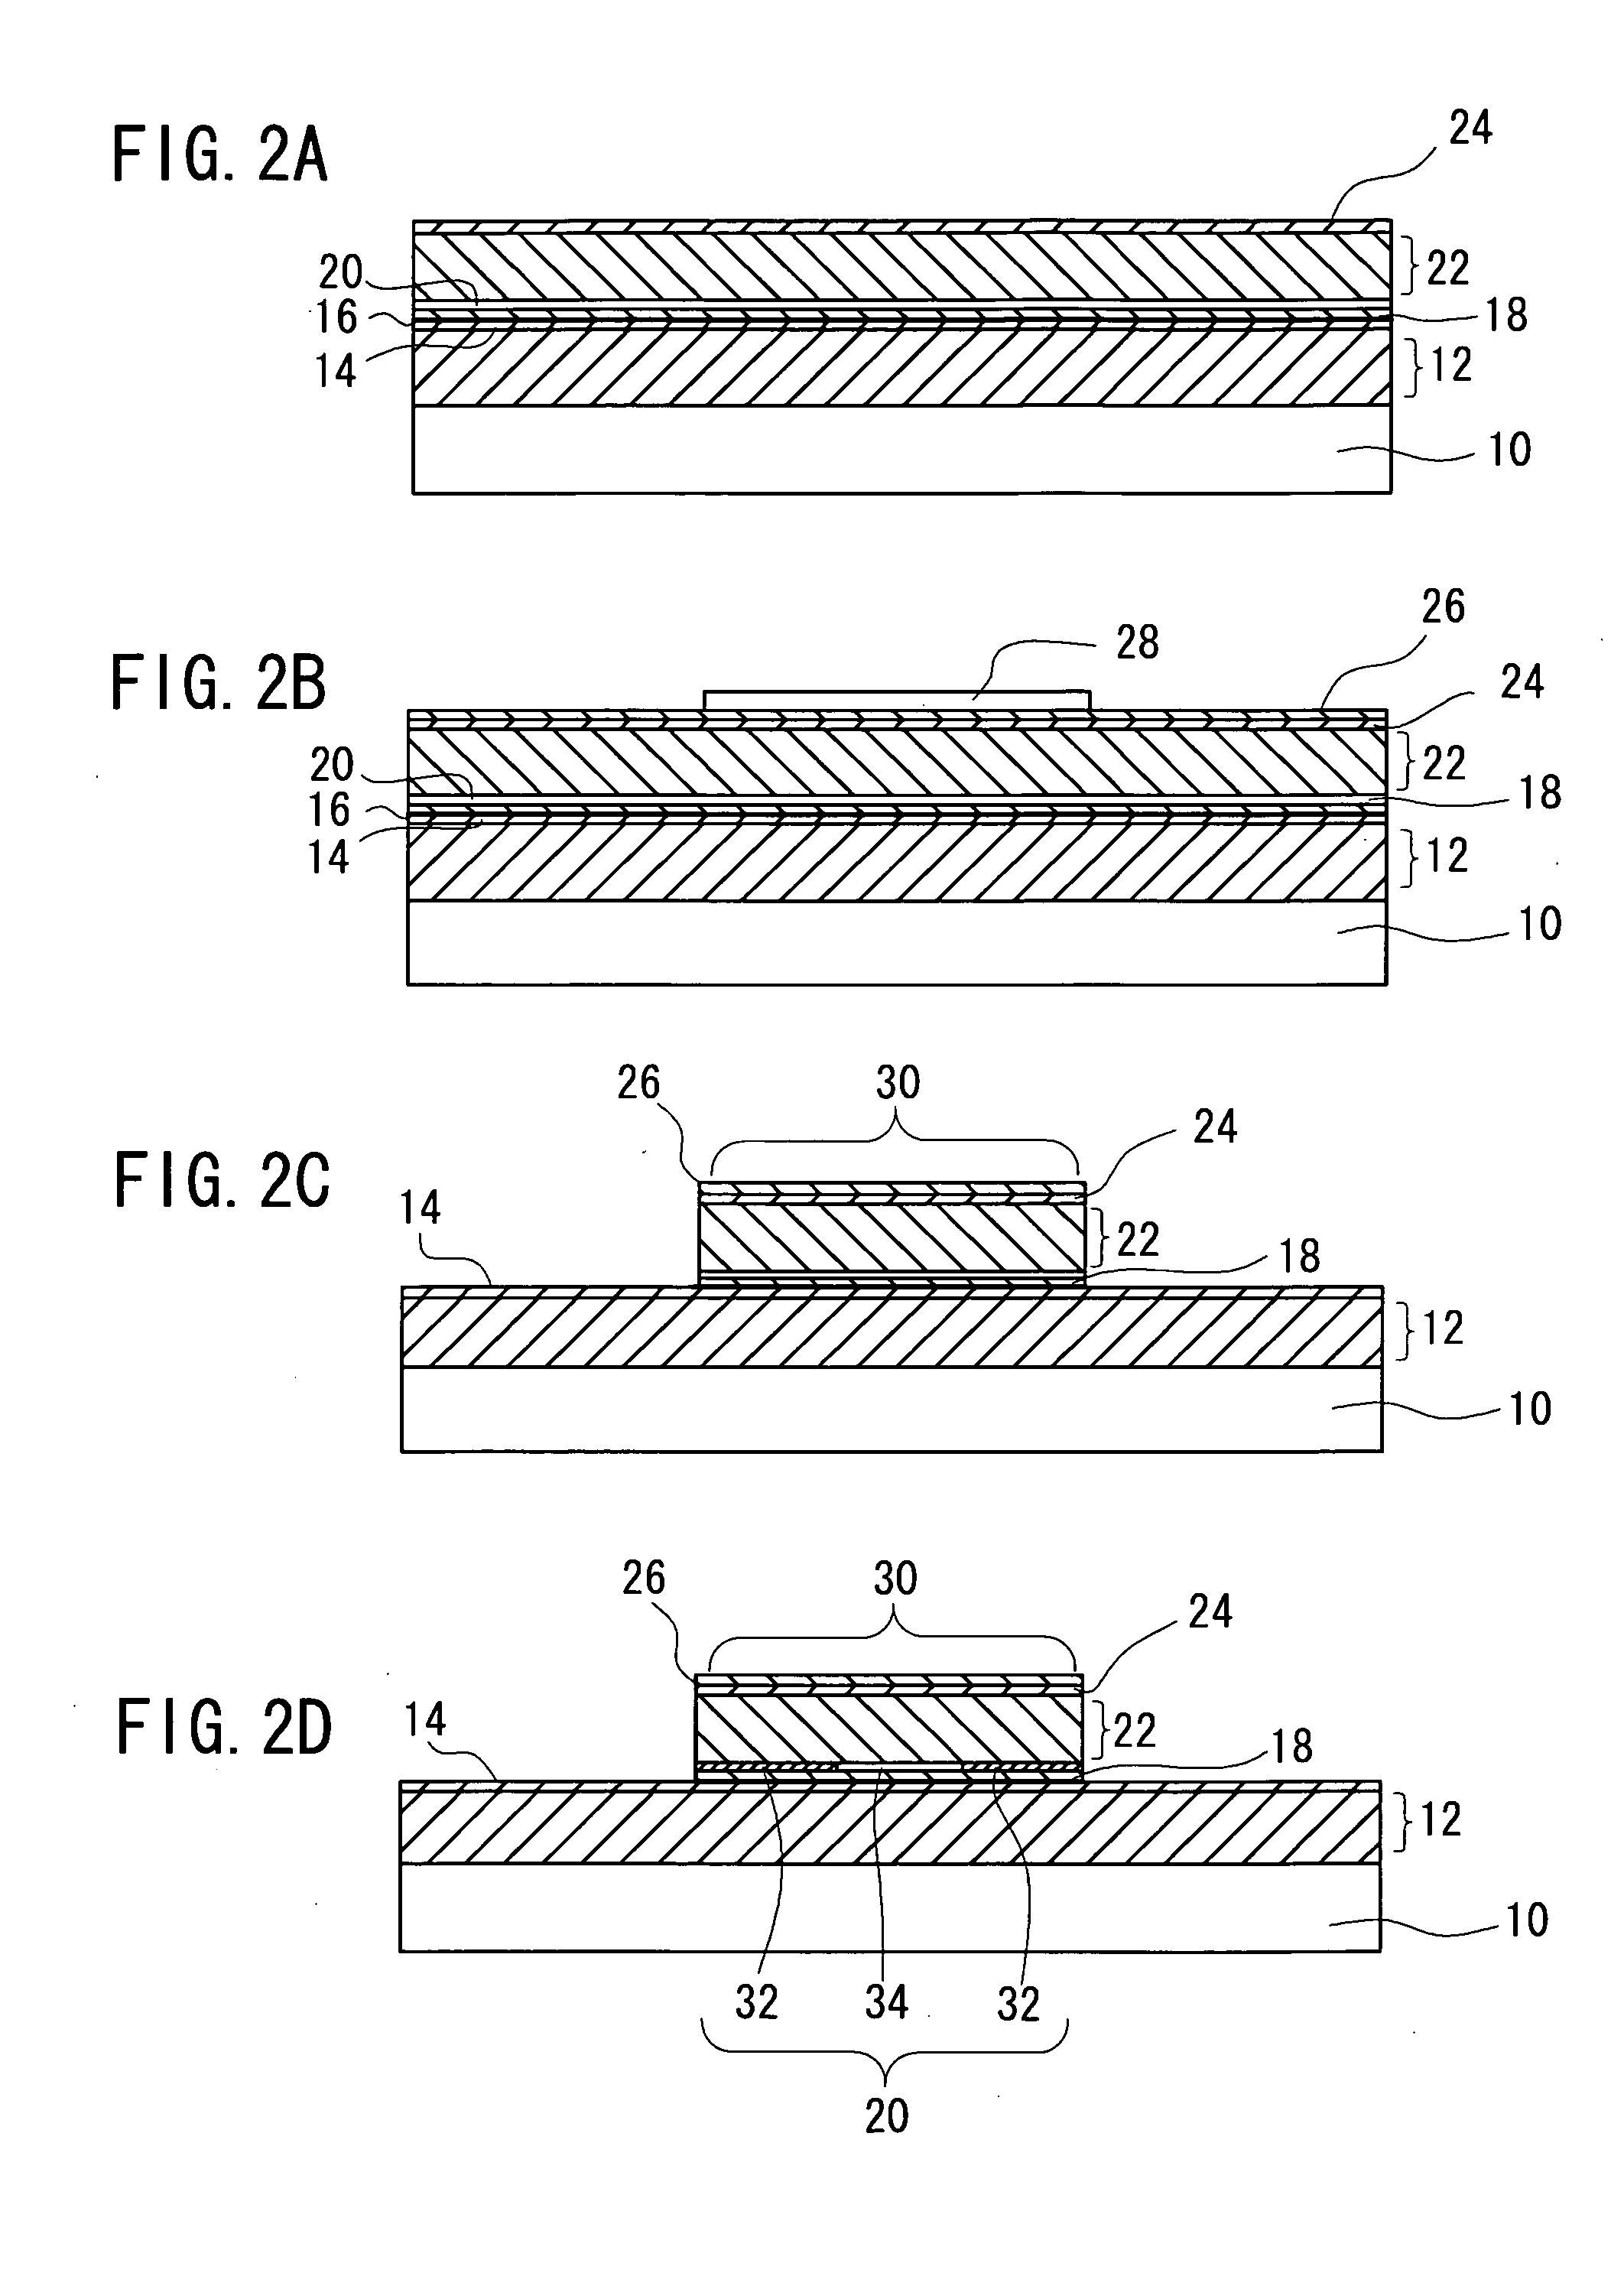 Optical data processing apparatus using vertical-cavity surface-emitting laser (VCSEL) device with large oxide-aperture